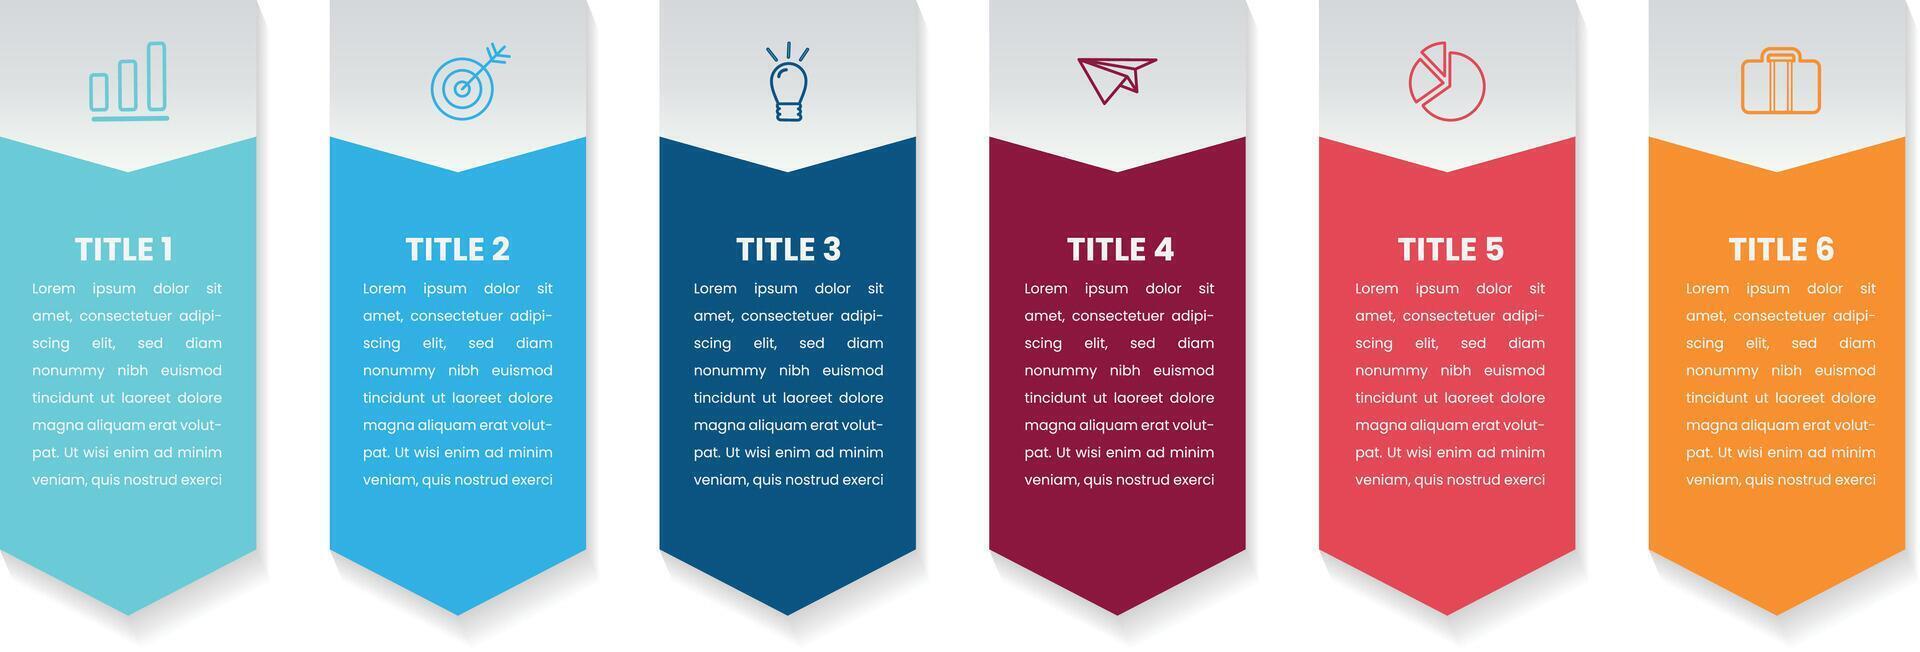 Timeline infographic with infochart. Modern presentation template with 6 spets for business process. Website template on white background for concept modern design free vector